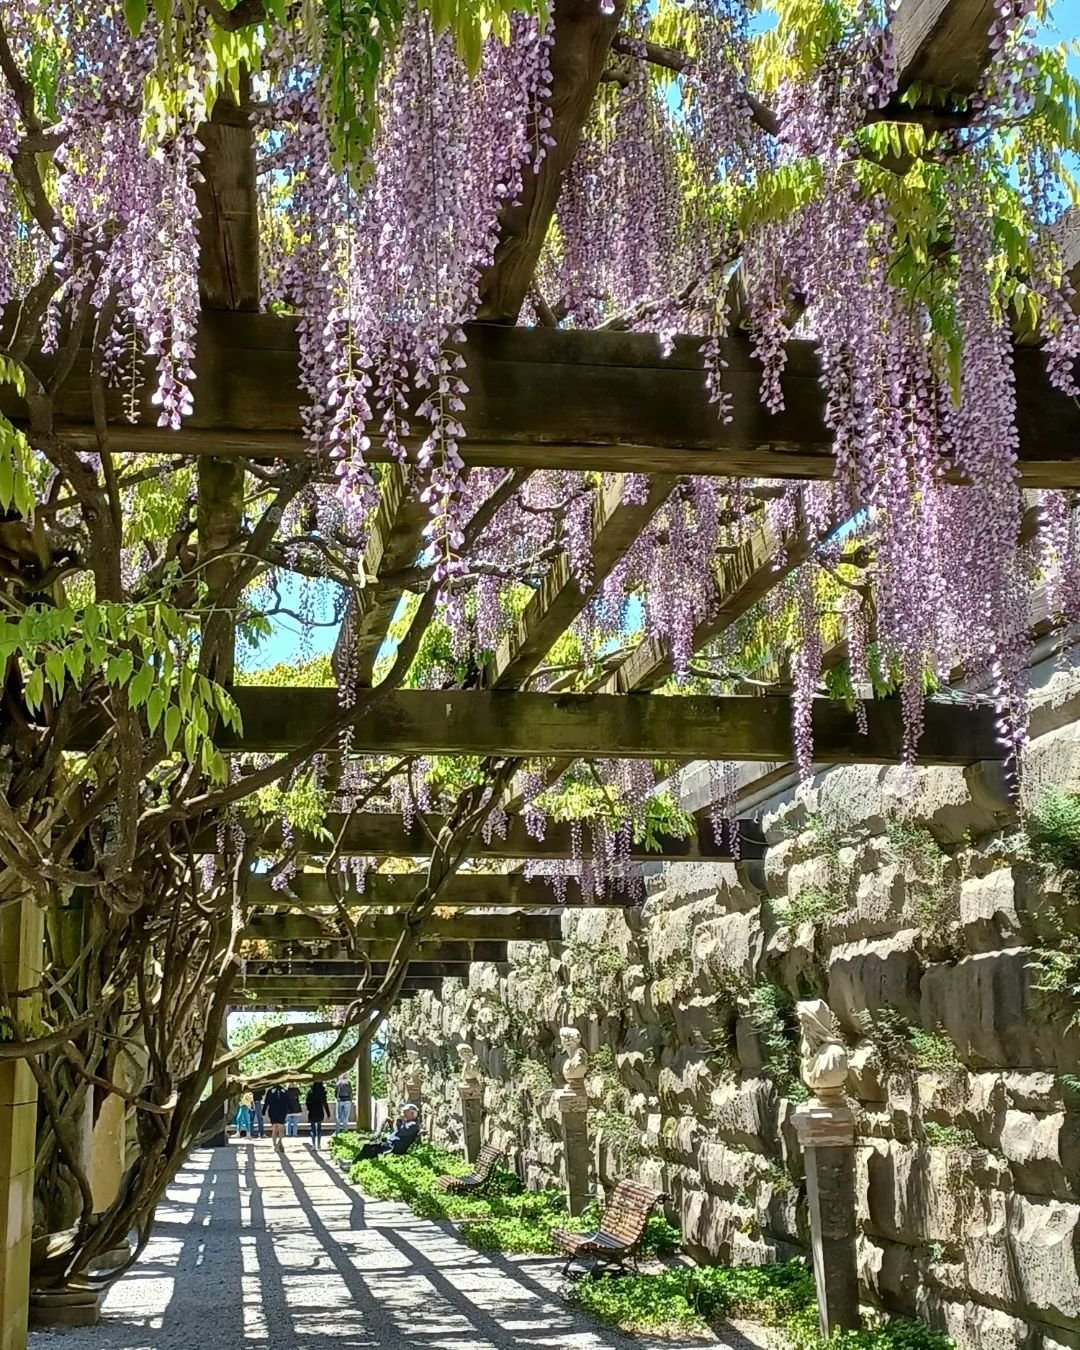 This week, the exquisite wisteria is in full bloom at the Biltmore Estate in Asheville, North Carolina.

Walk with me through the pergola that is near Biltmore House.

This walkway has fountains, statues, and benches.

The wisteria is cascading gown 